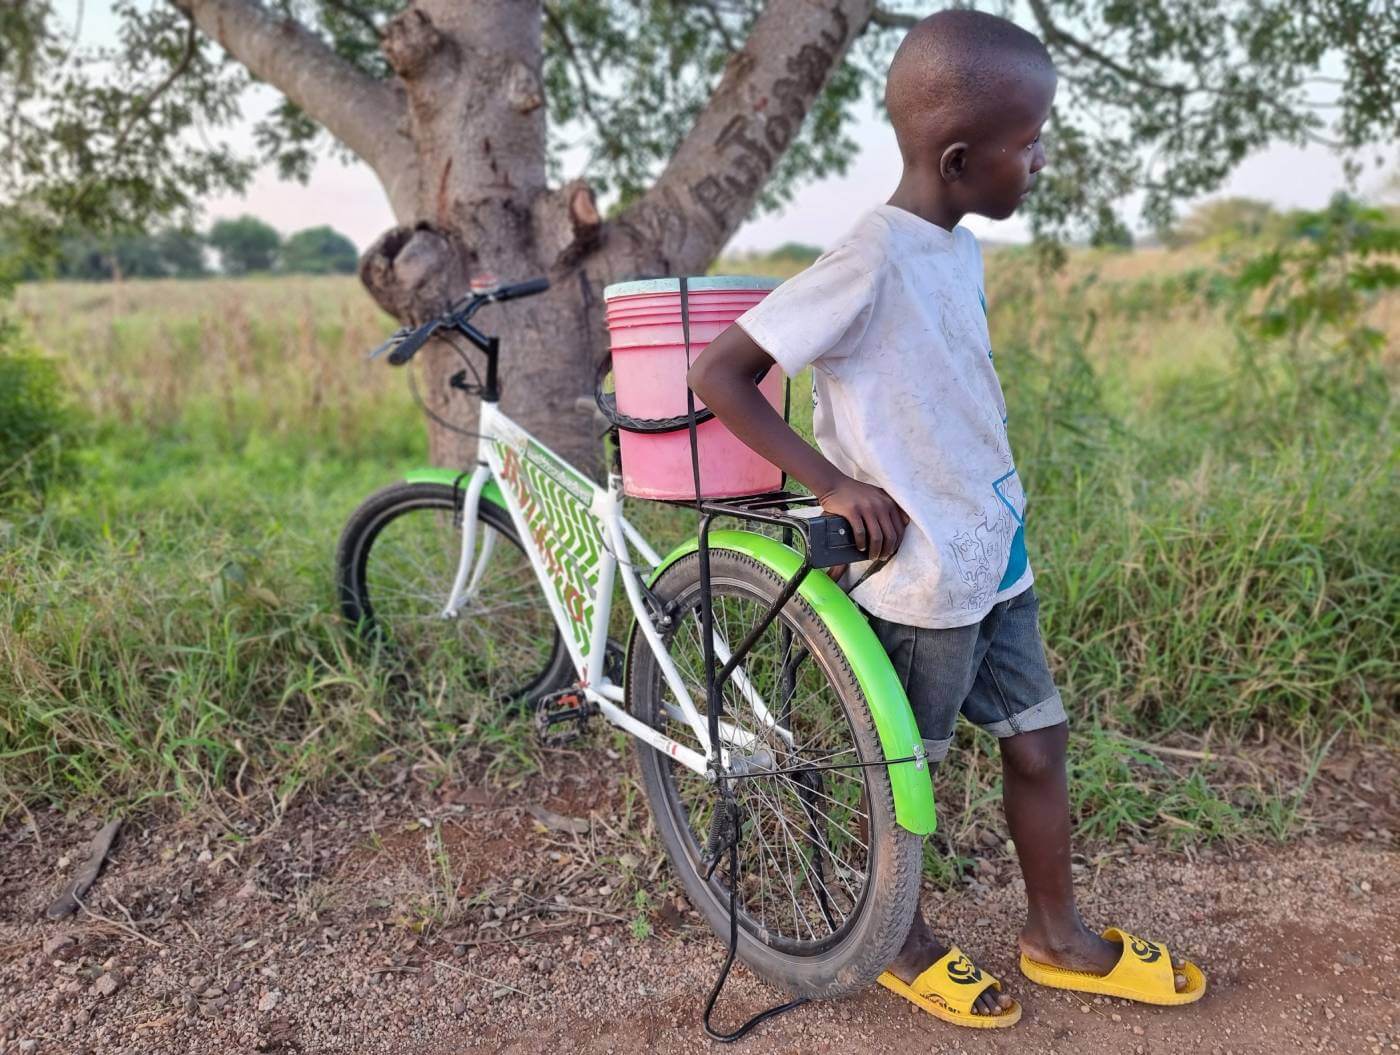 A child stands next to a green and white Mozambike bicycle with a pink and white striped basket on the back, leaning against a tree trunk in a rural setting with a dirt road and green vegetation in the background.